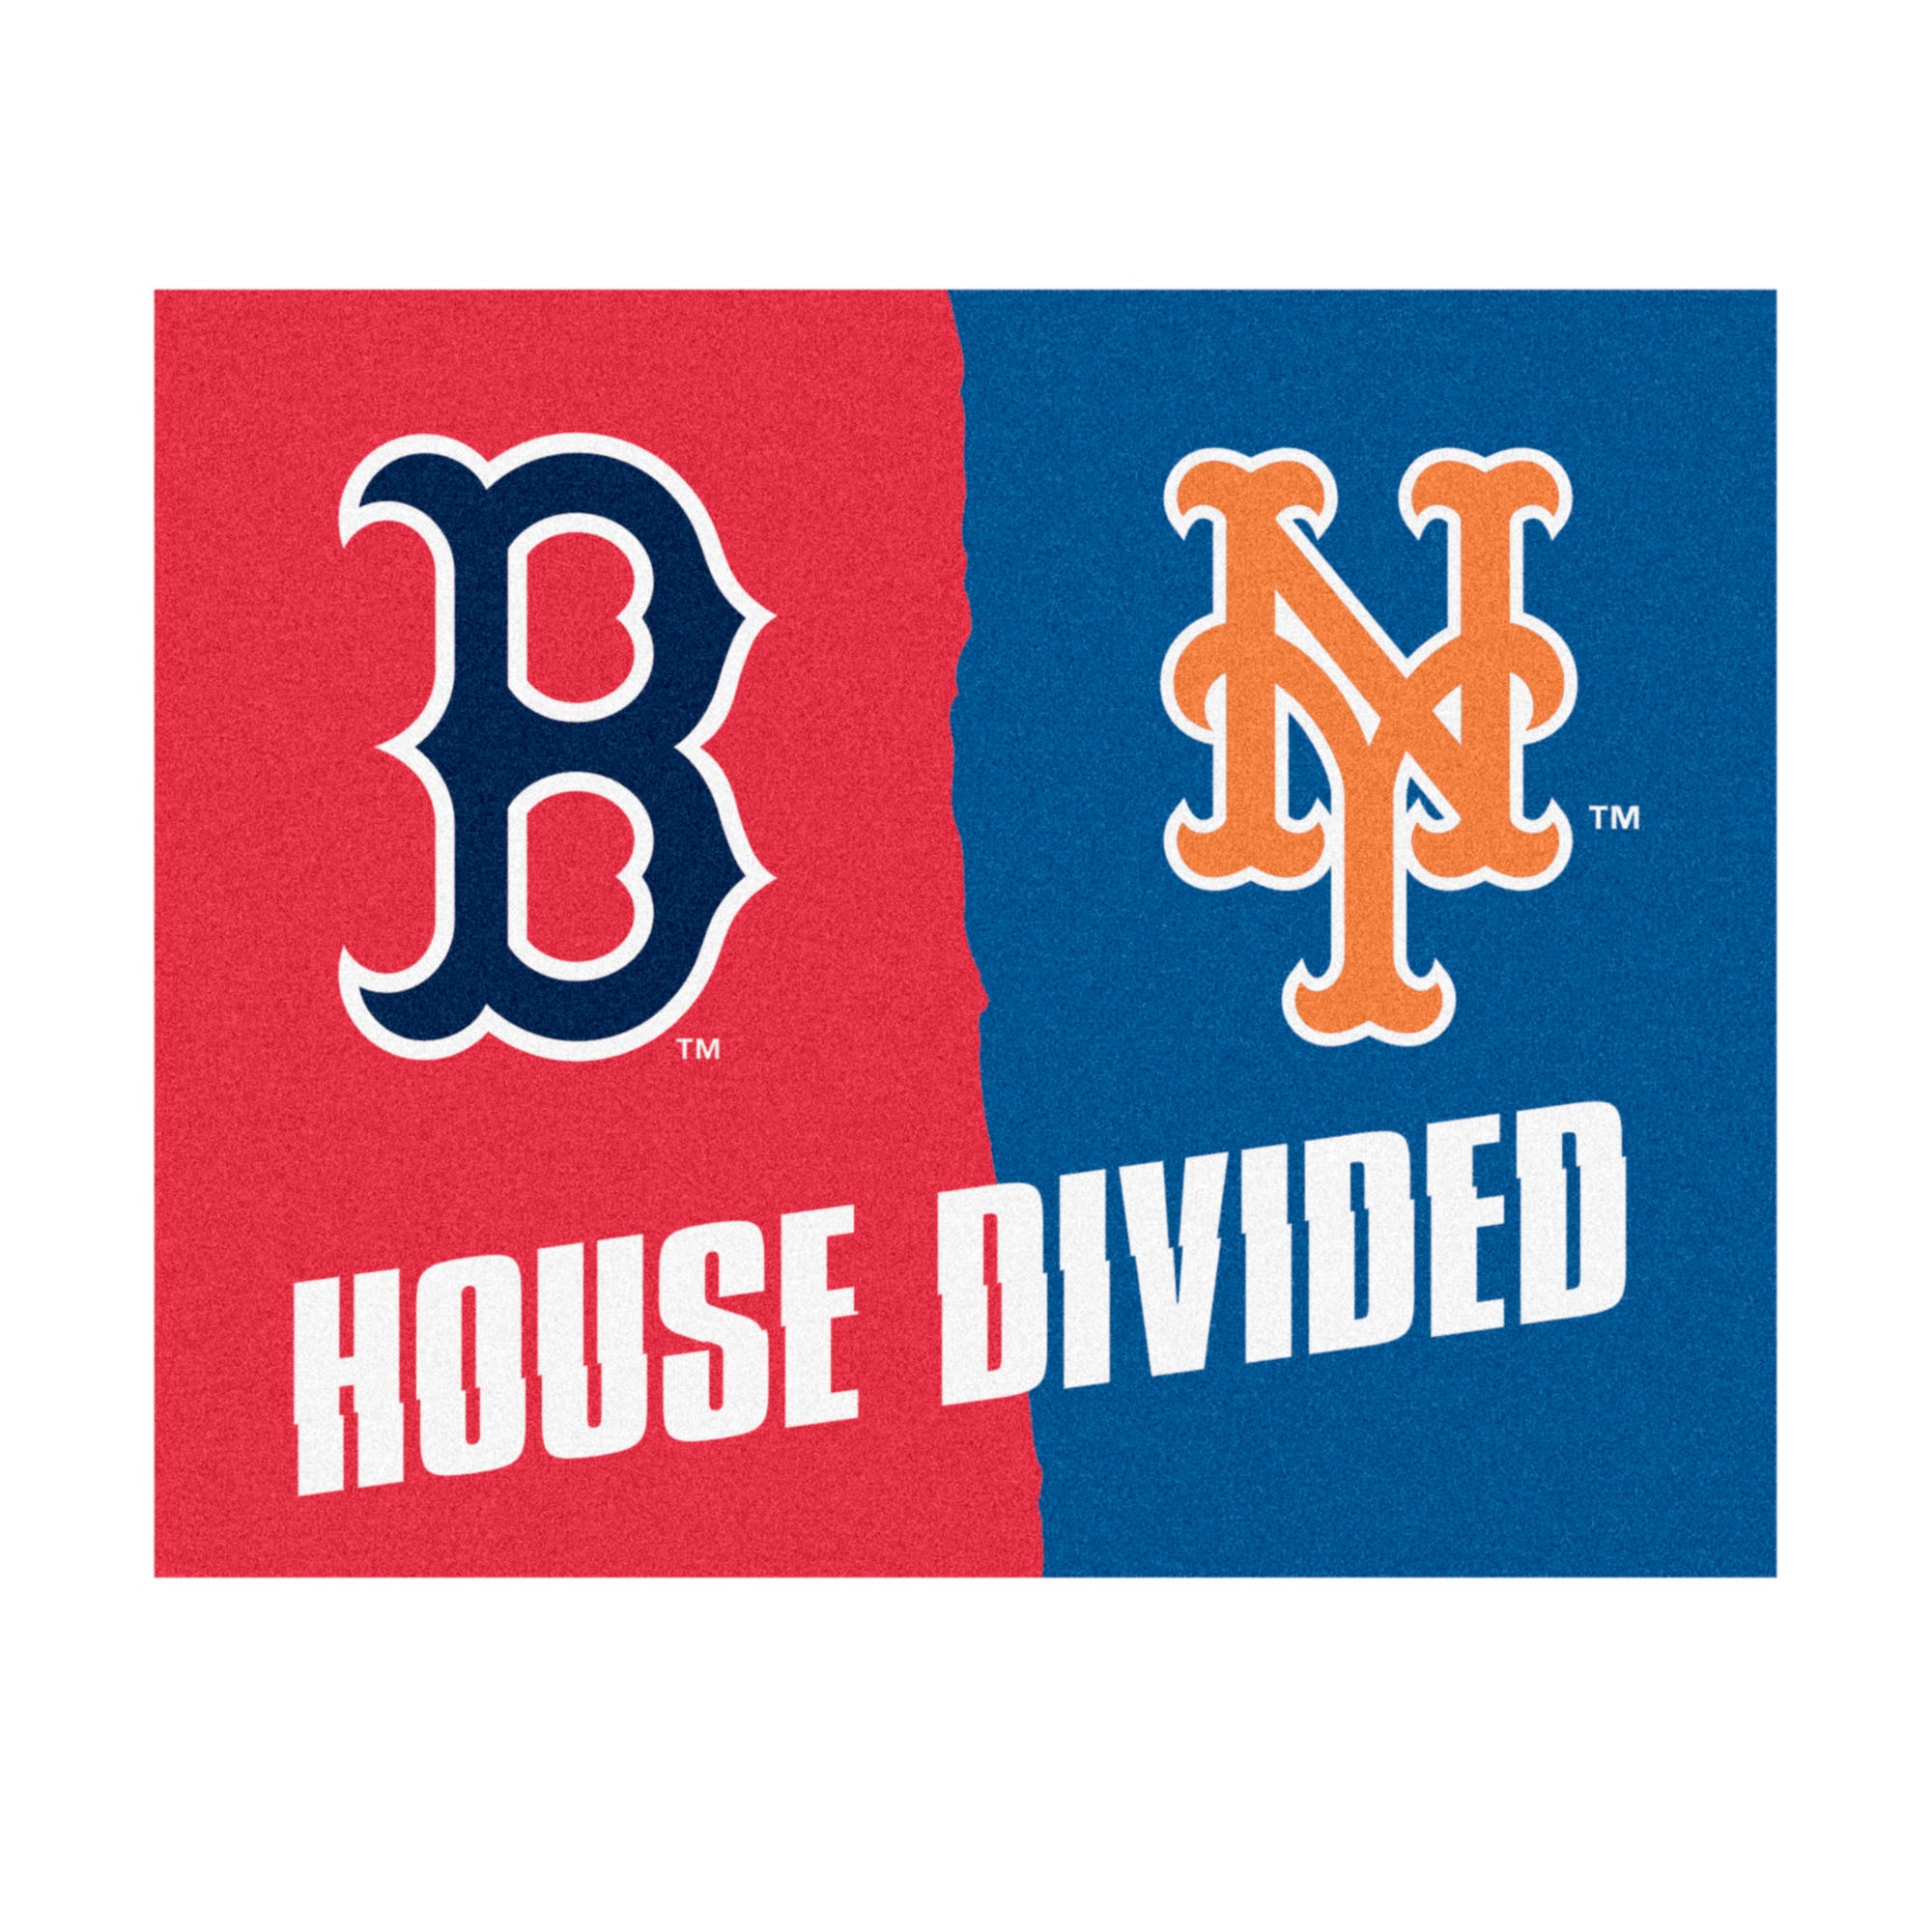 FANMATS, MLB House Divided - Red Sox / Mets House Divided Rug